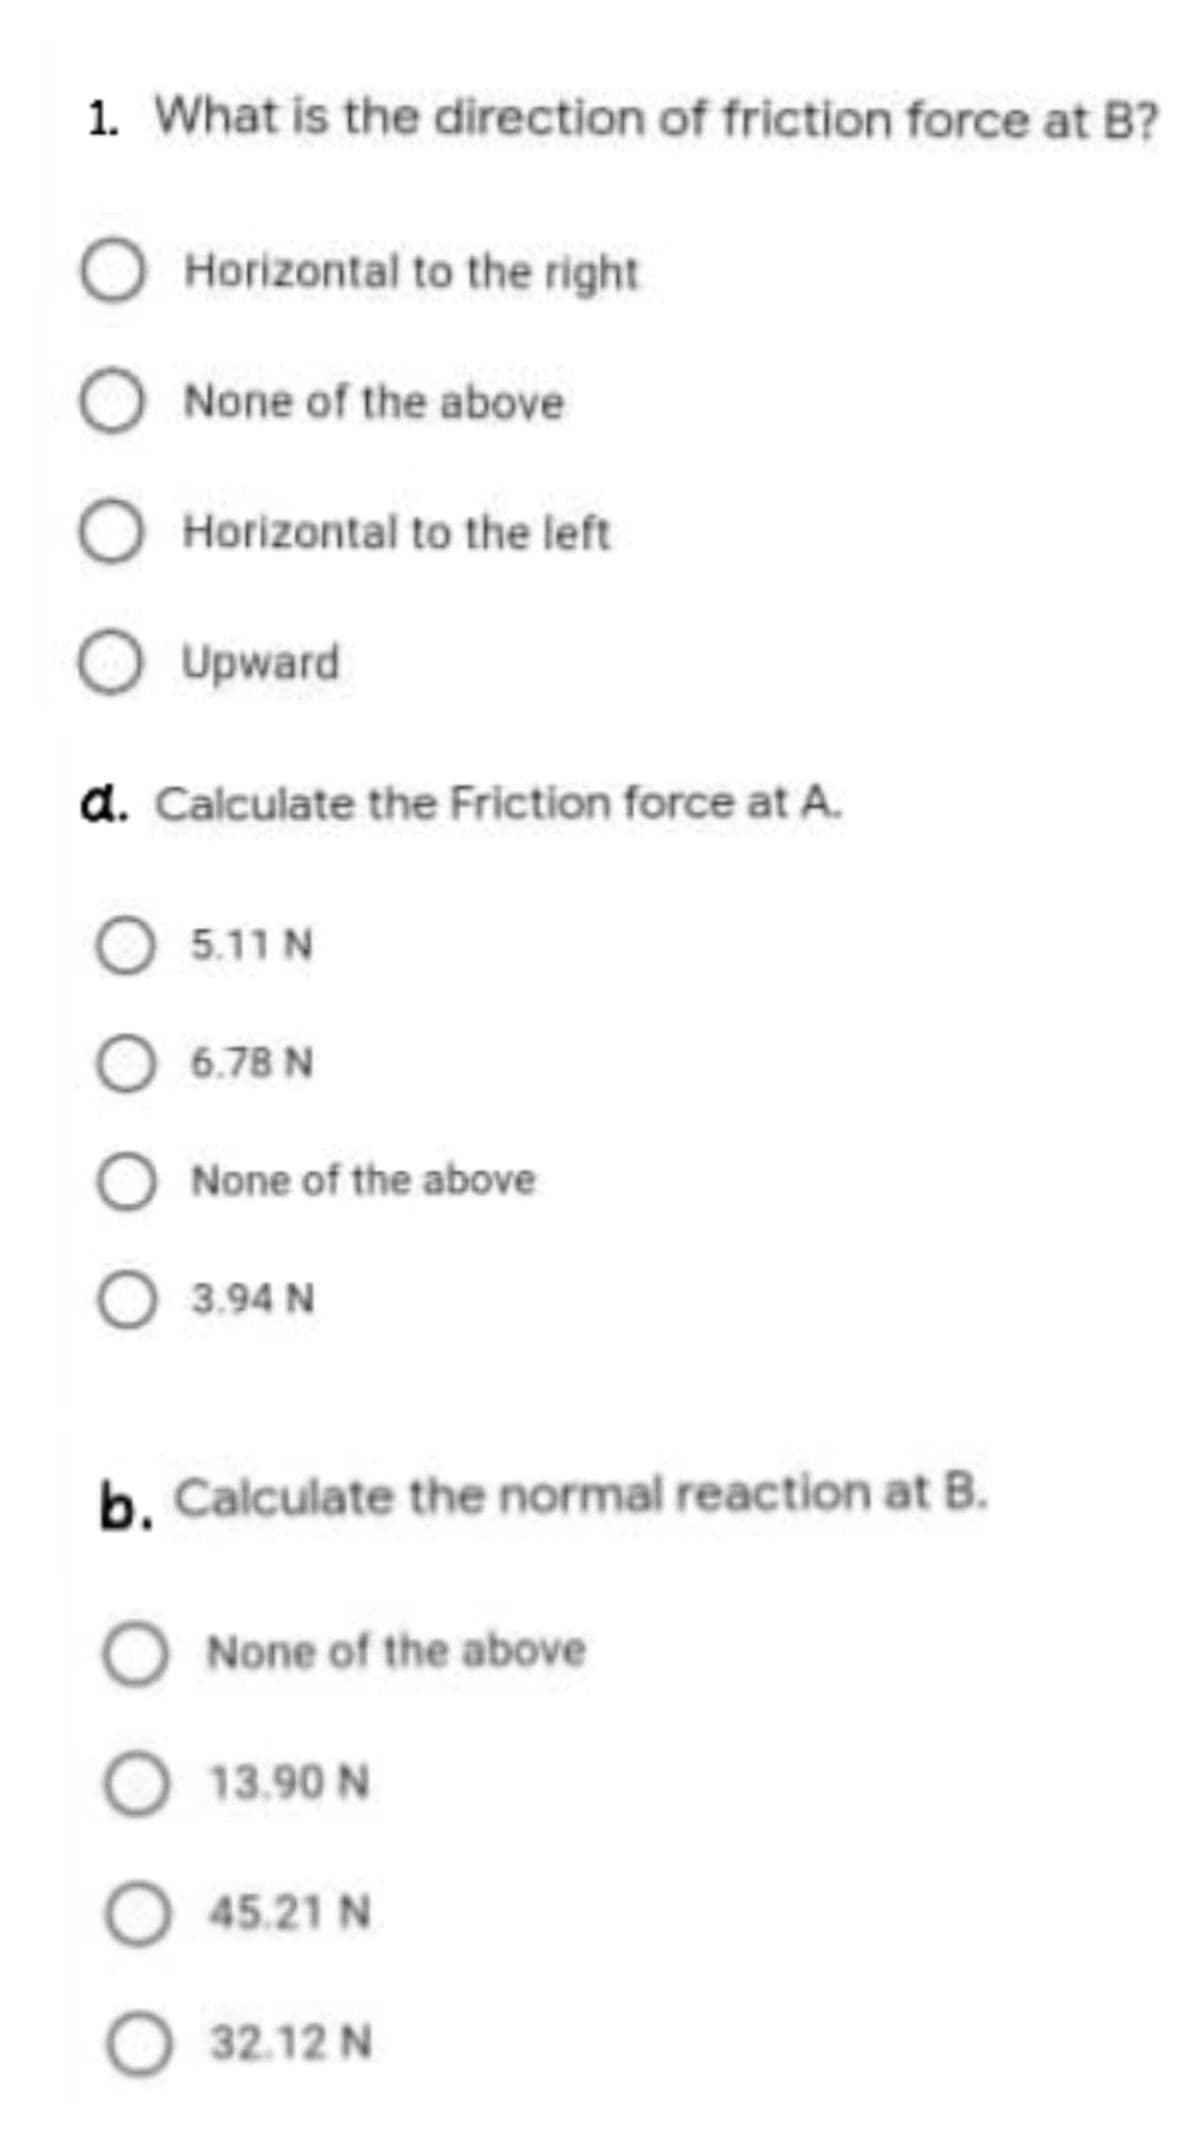 1. What is the direction of friction force at B?
Horizontal to the right
None of the above
Horizontal to the left
Upward
d. Calculate the Friction force at A.
O 5.11 N
6.78 N
None of the above
O 3.94 N
b. Calculate the normal reaction at B.
None of the above
13.90 N
O 45.21 N
O 32.12 N
O O O O
O O O
